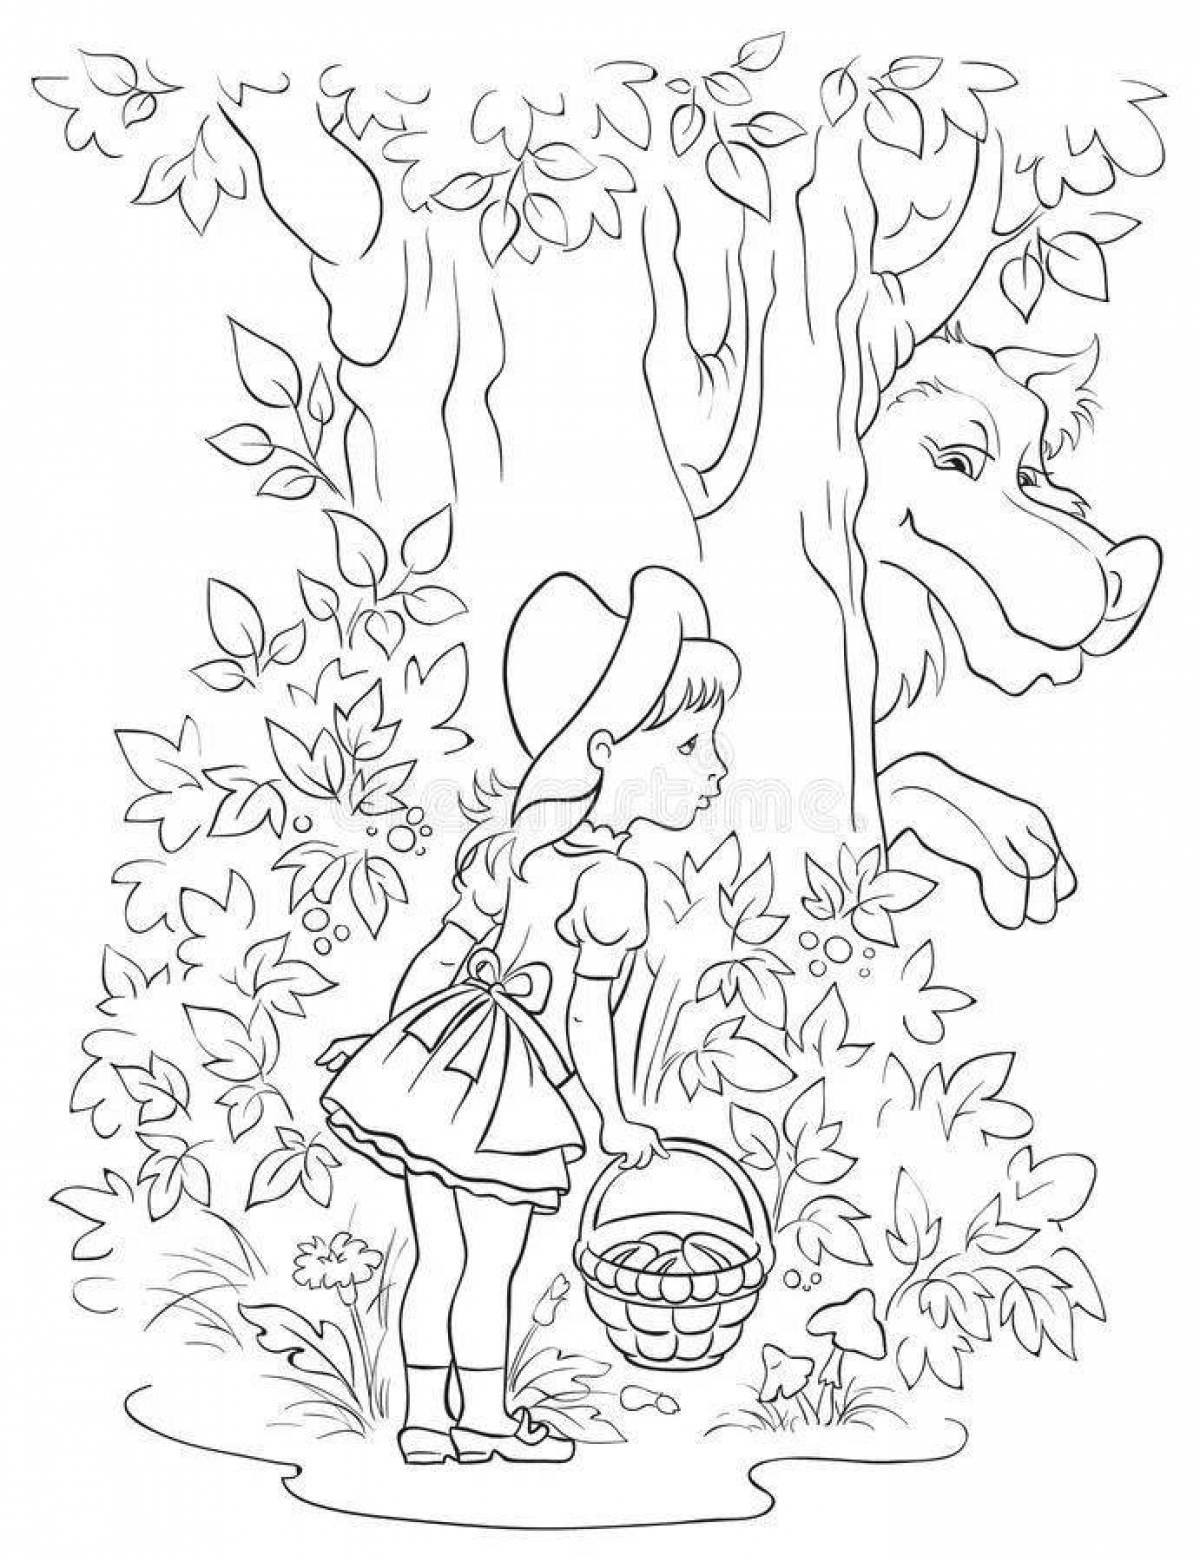 Delightful coloring wolf and little red riding hood